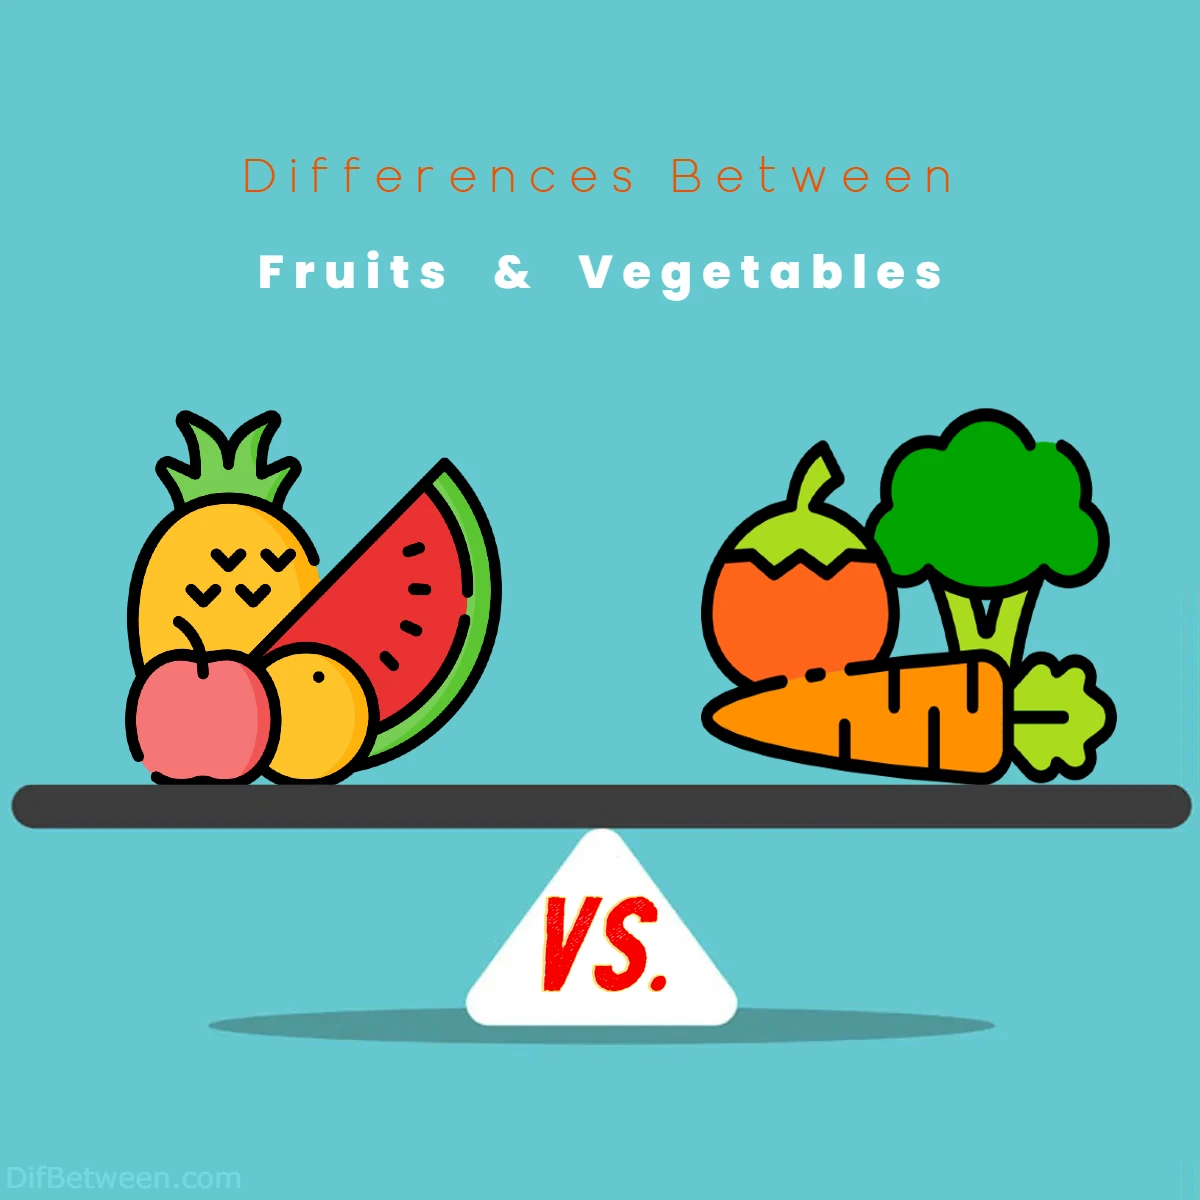 Differences Between Fruits vs Vegetables